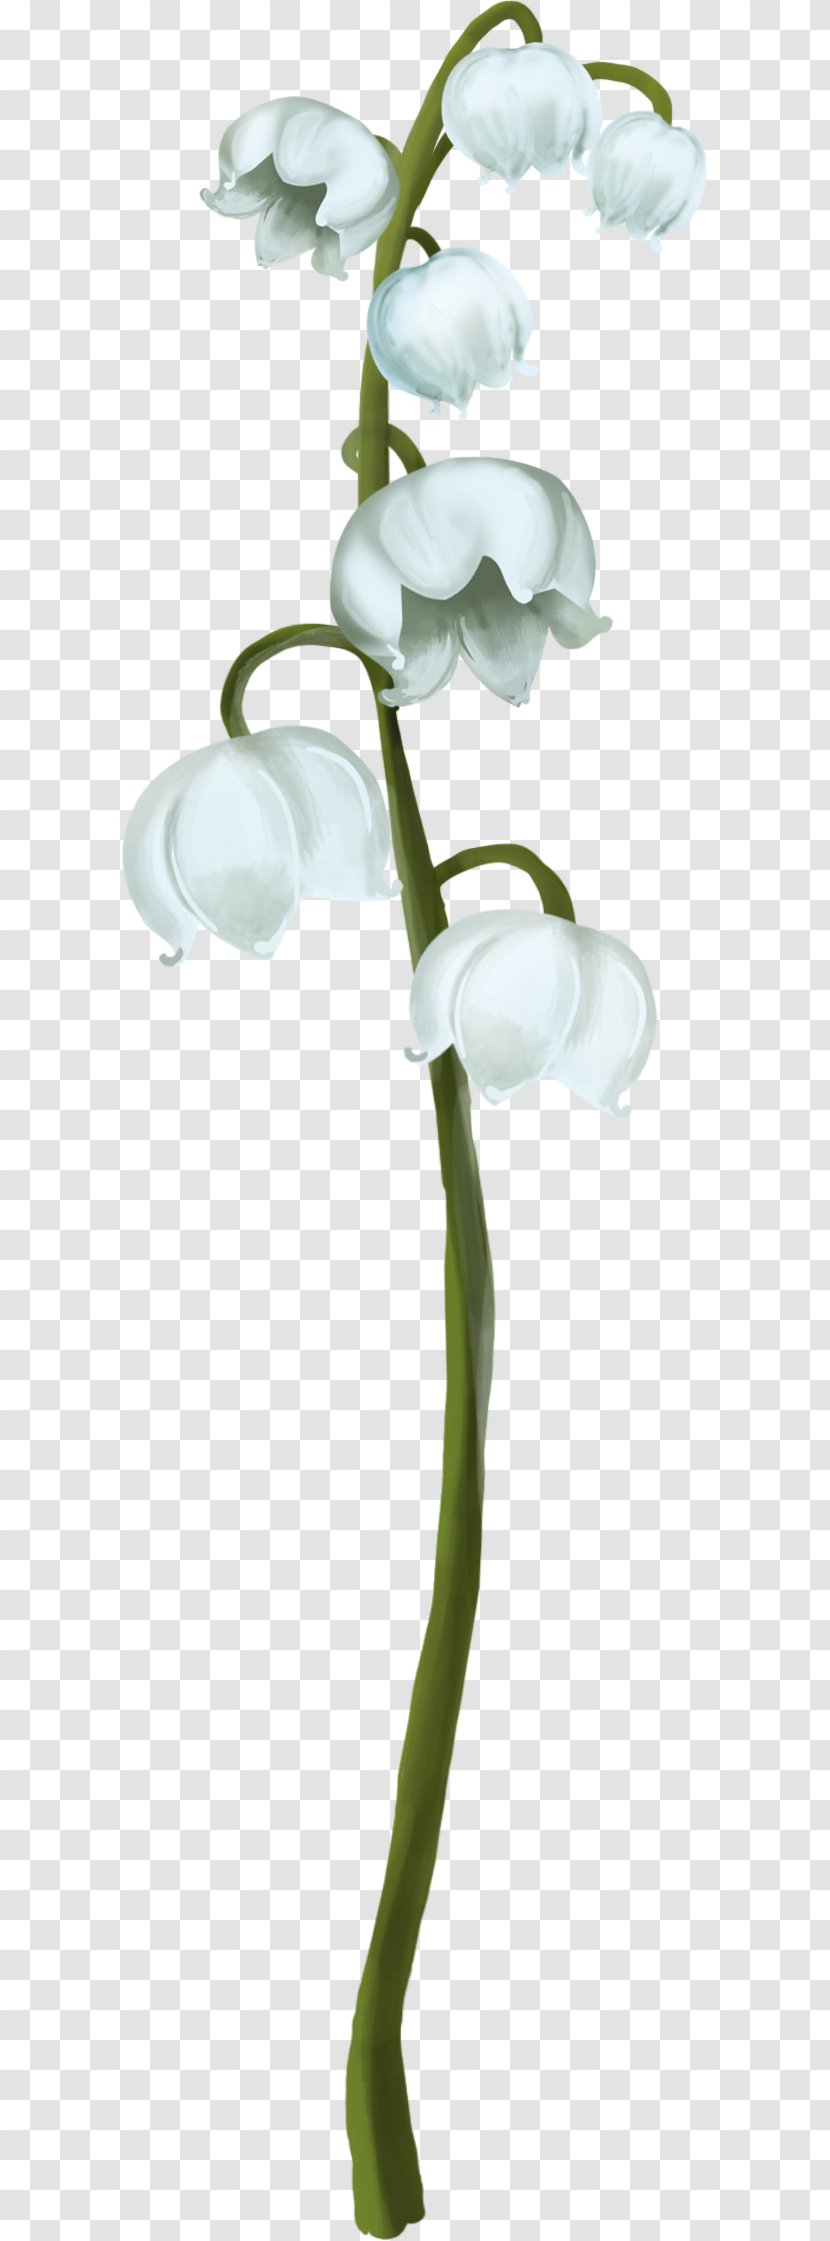 Lily Of The Valley Plant Stem Clip Art Transparent PNG